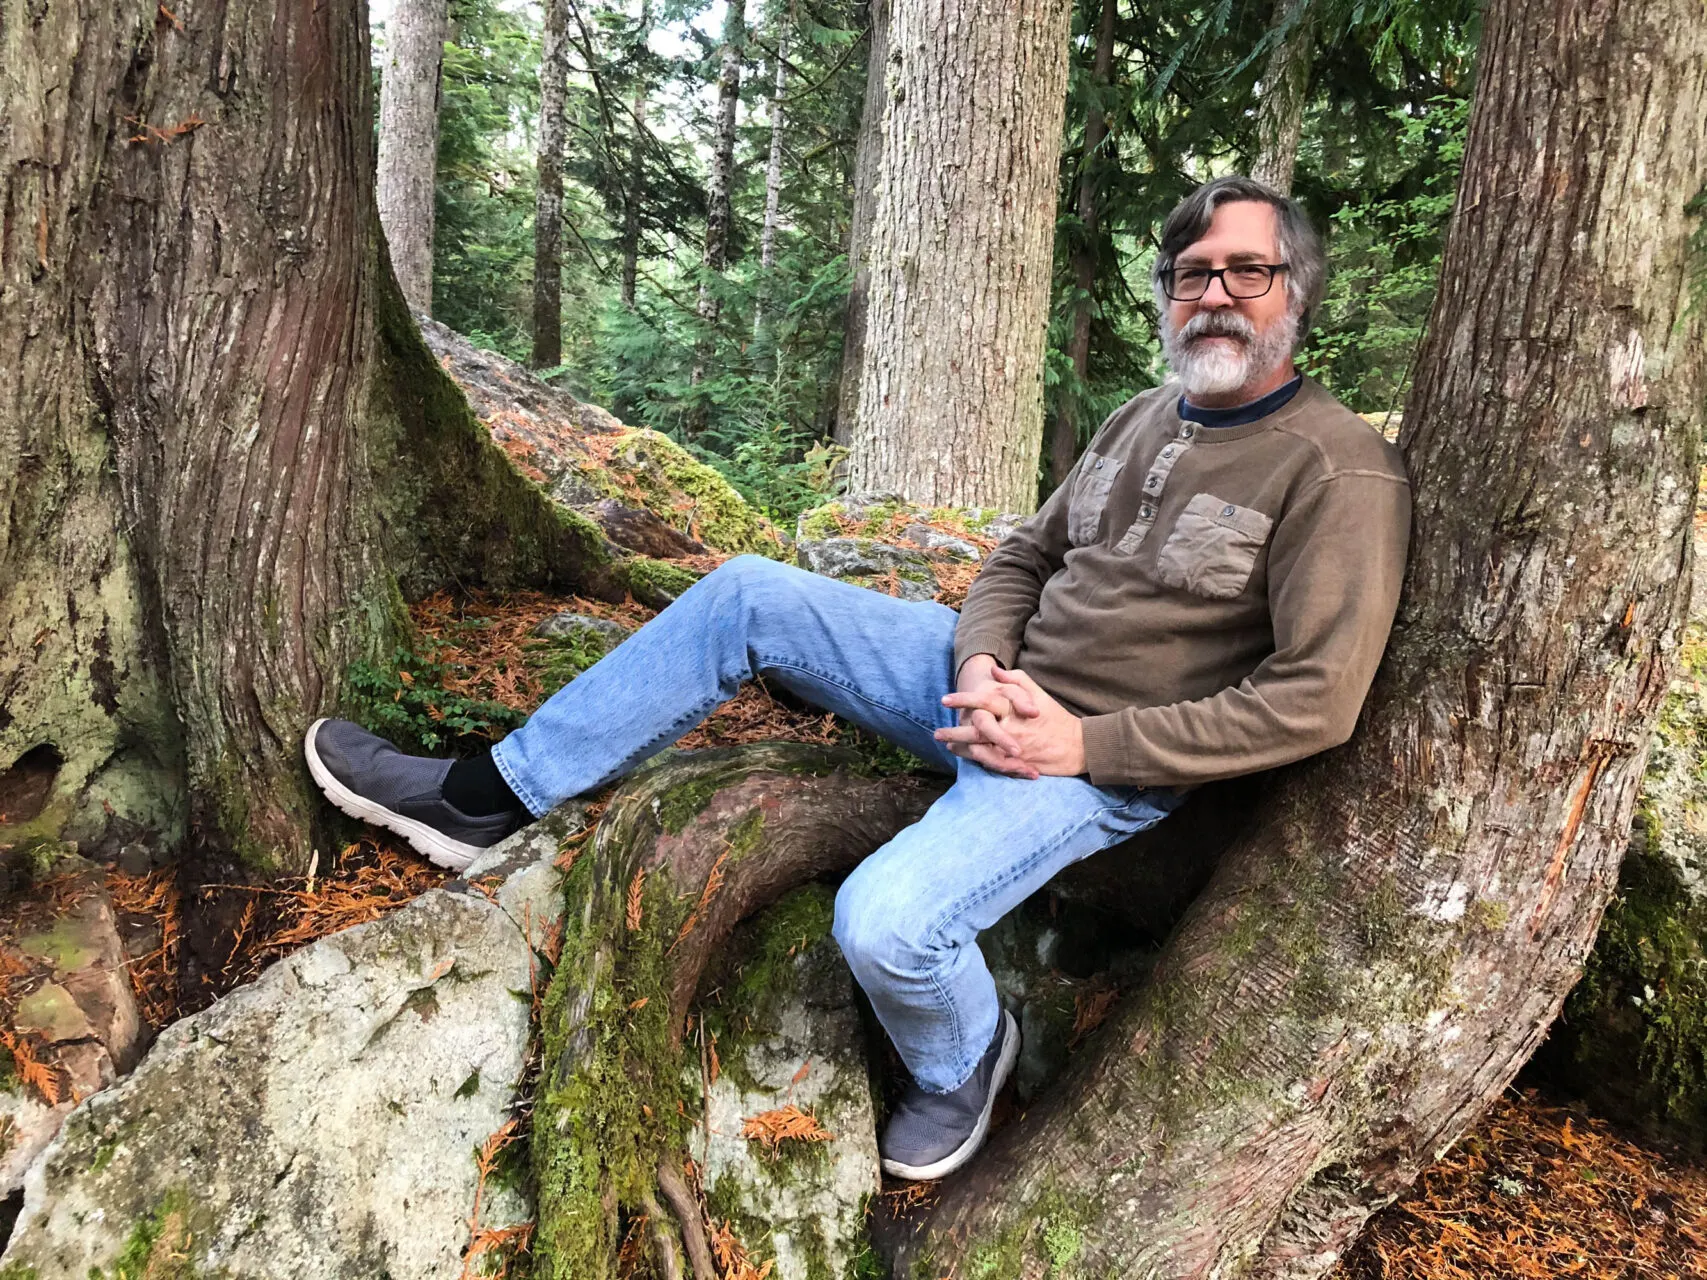 Jim in a tree in Olympic National Park.